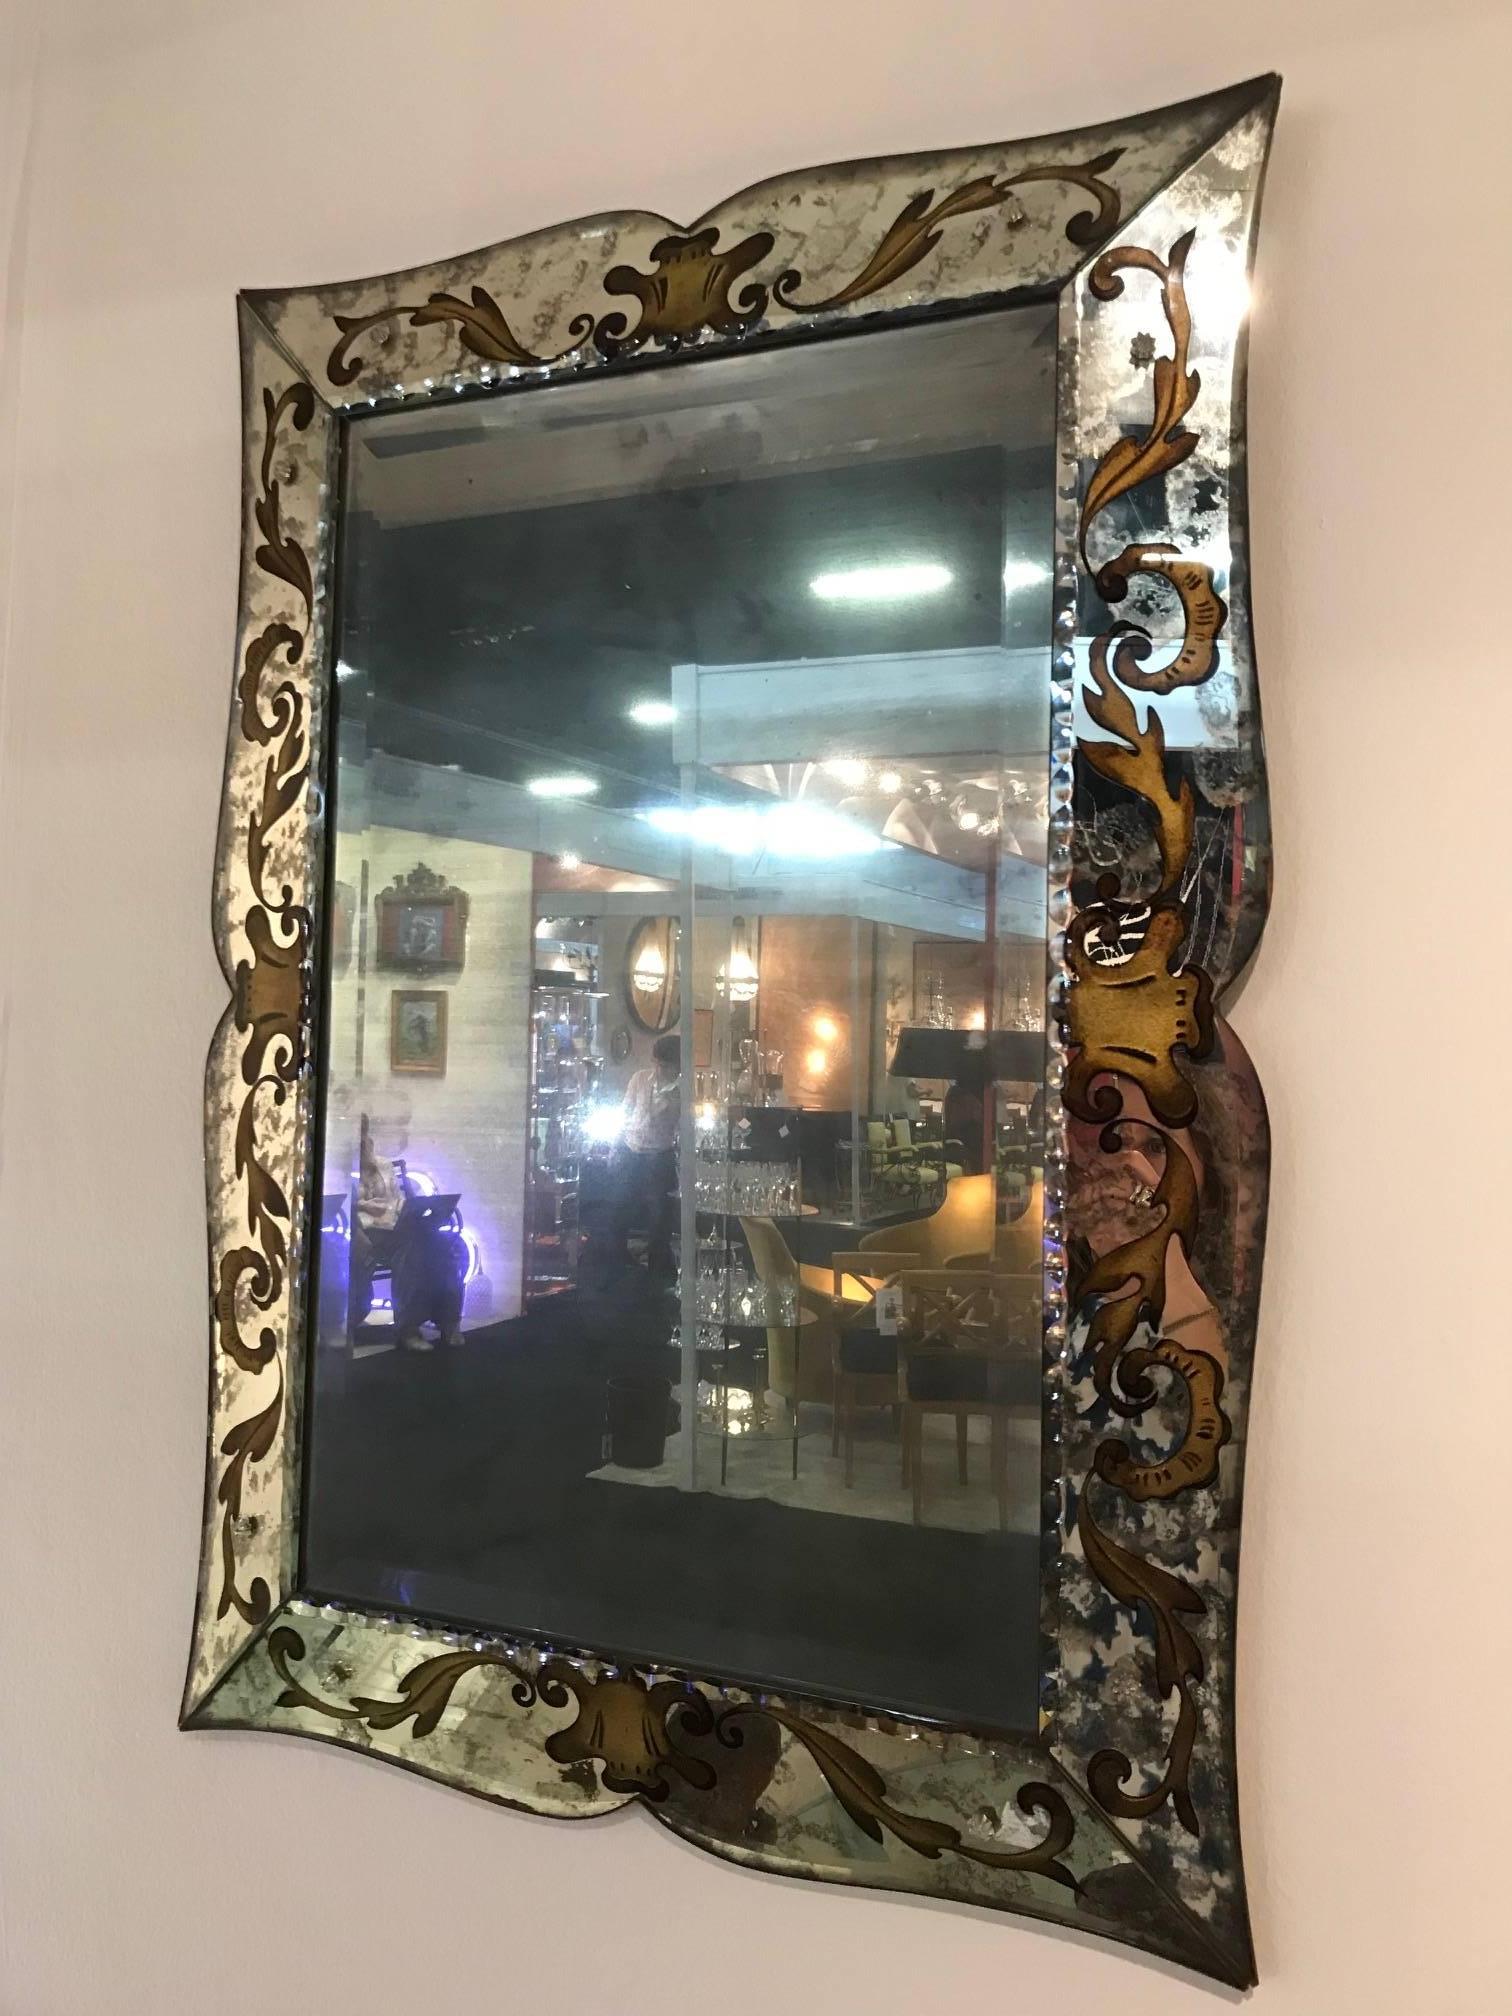 An elegant verre eglomise mirror with gilded and chiselled frame detail. Central mirror plate is antiqued.